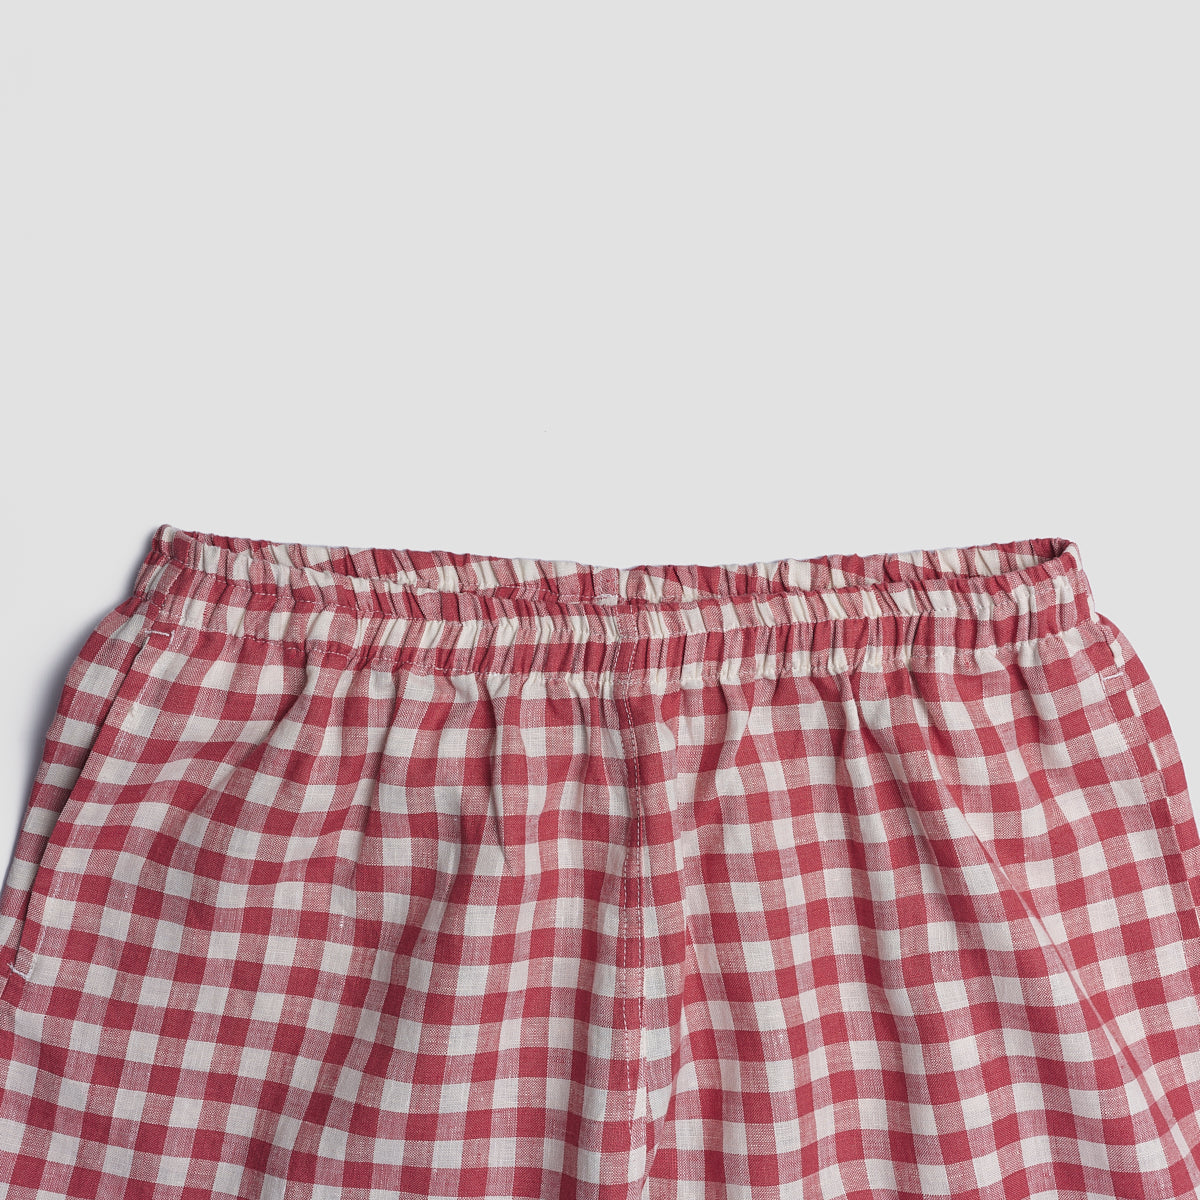 Mineral Red Gingham Pajama Shorts